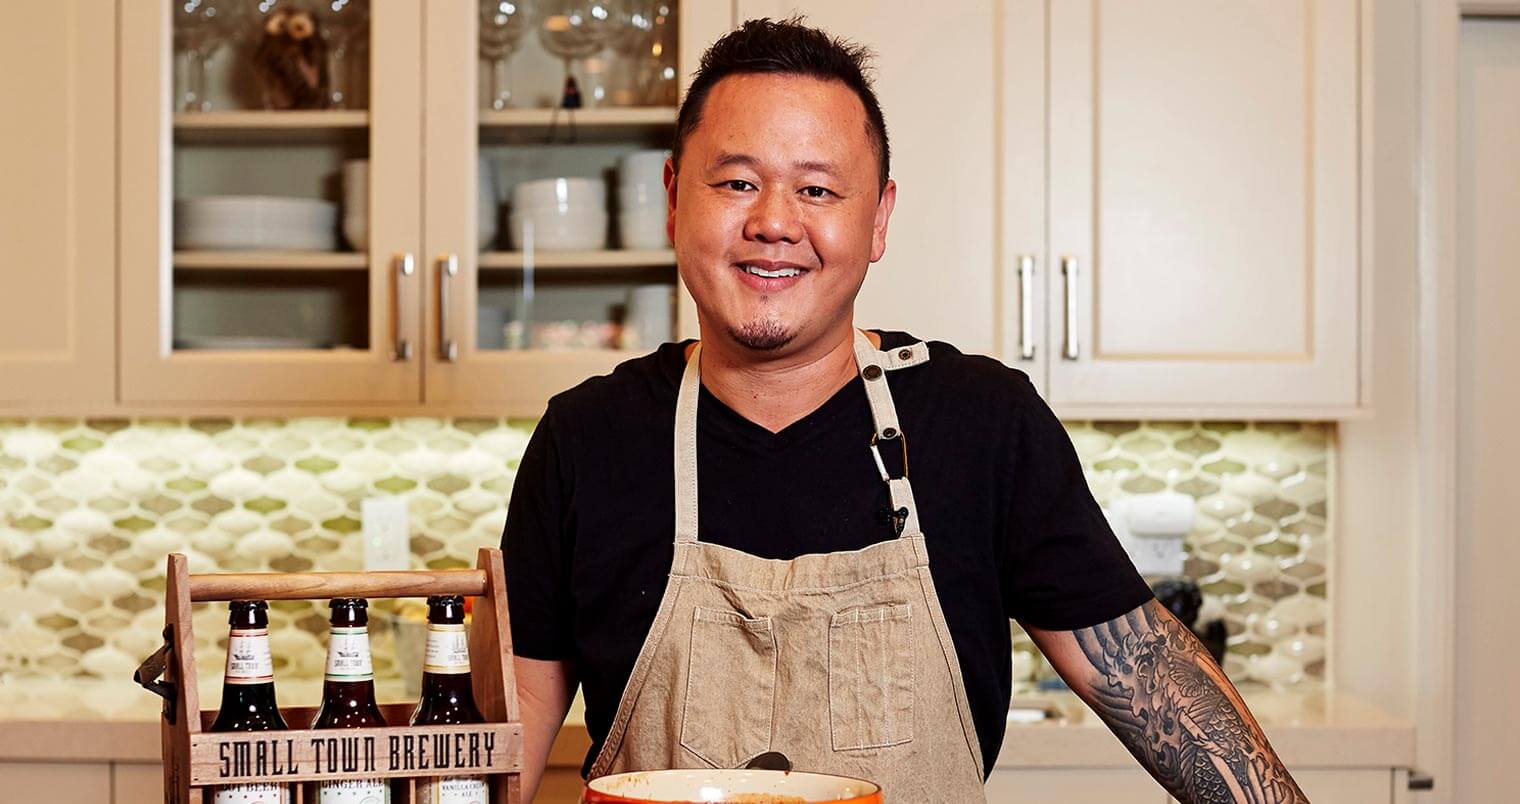 Small Town Brewery Partners with Celebrity Chef Jet Tila for "Not Your Father's Day" Program, featured image